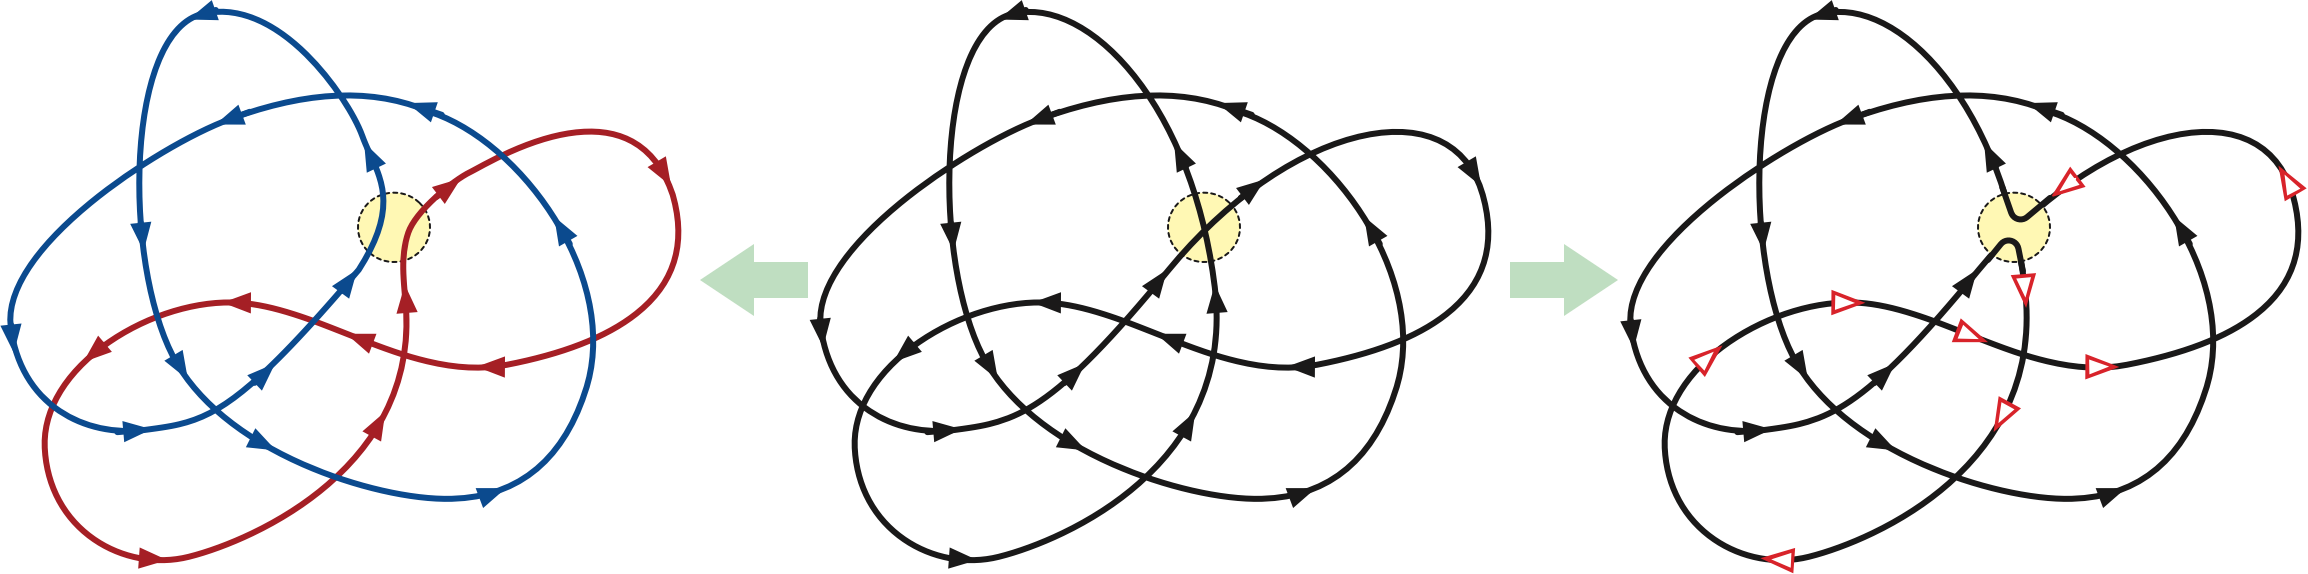 Smoothing a curve at a vertex. Left: preserving direction. Right: preserving connection.